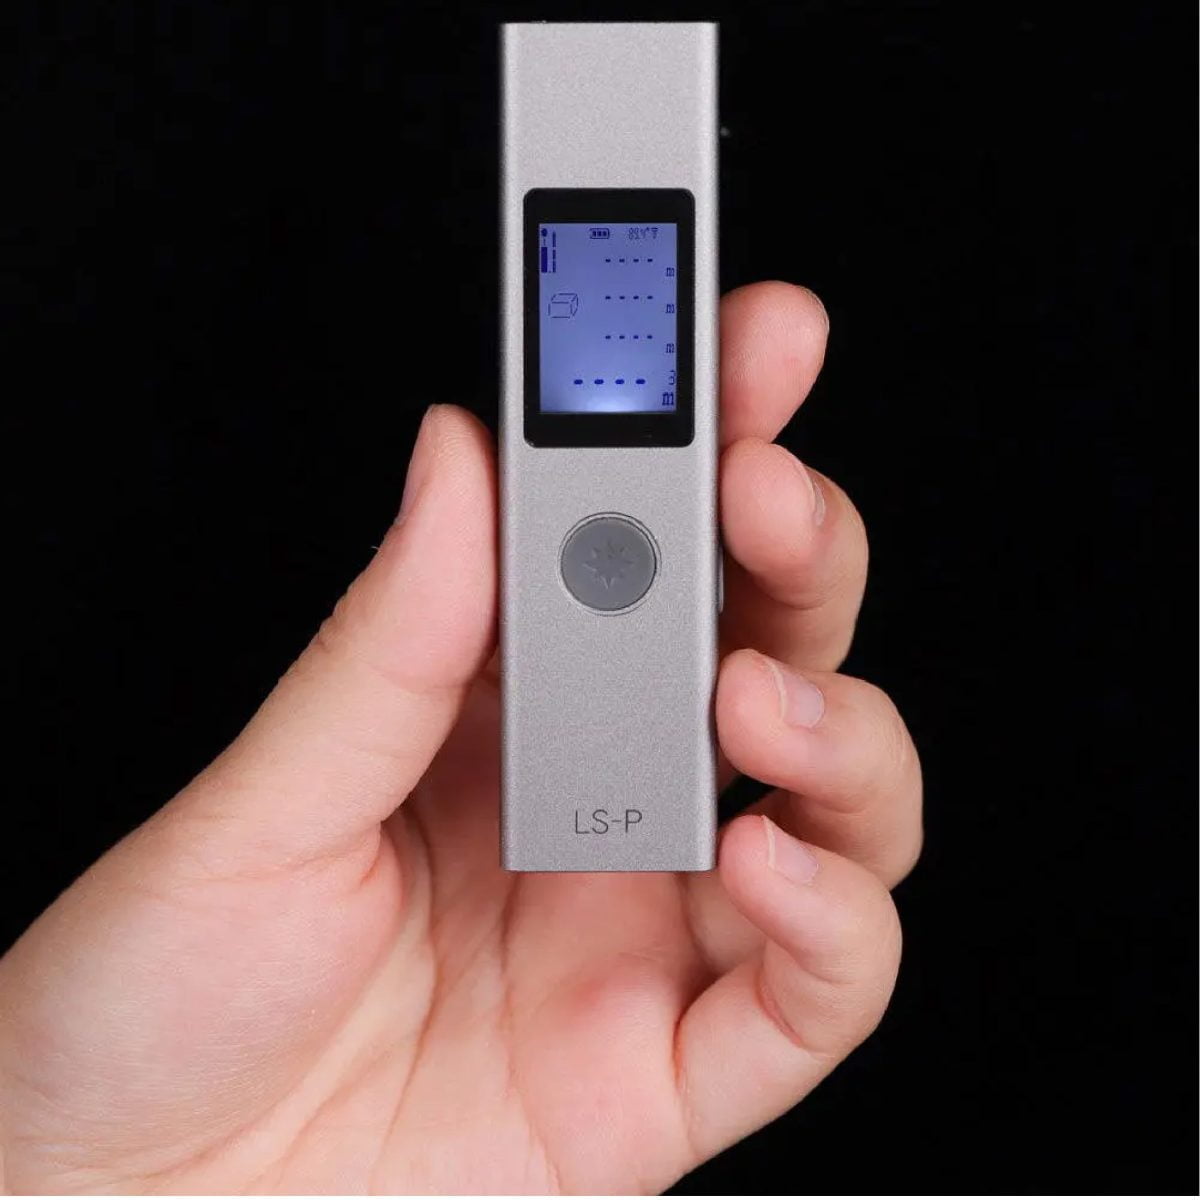 Wewweqs 01 Xiaomi Duka Ls-P 40M Laser Distance Meter Area Volume Angle Pythagorean Laser Rangefinder High Precision Portable Laser Range Finder From Xiaomi Youpin Https://Youtu.be/Acdh957Y-X8 Xiaomi Xiaomi Duka Laser Range Finder 40M Ls-P Portable High Precision Measurement Laser Distance Meter - Gray